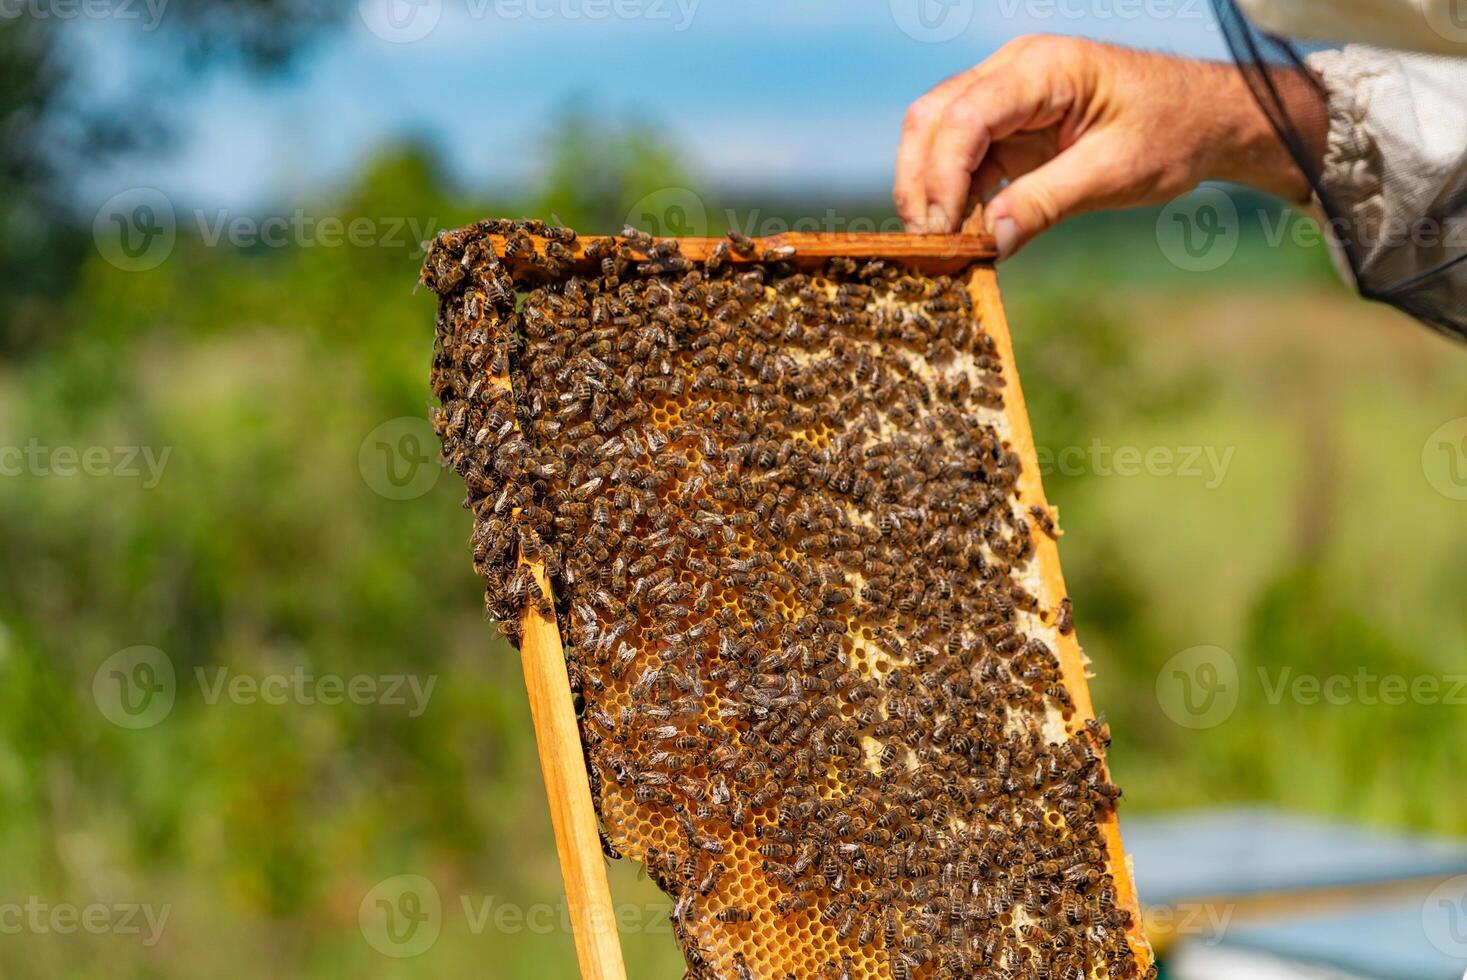 Hands of a man holds a frame with honeycombs for bees in the garden in summer. Beekeeper holding honeycomb with bees in his hands looking at it. Close-up photo